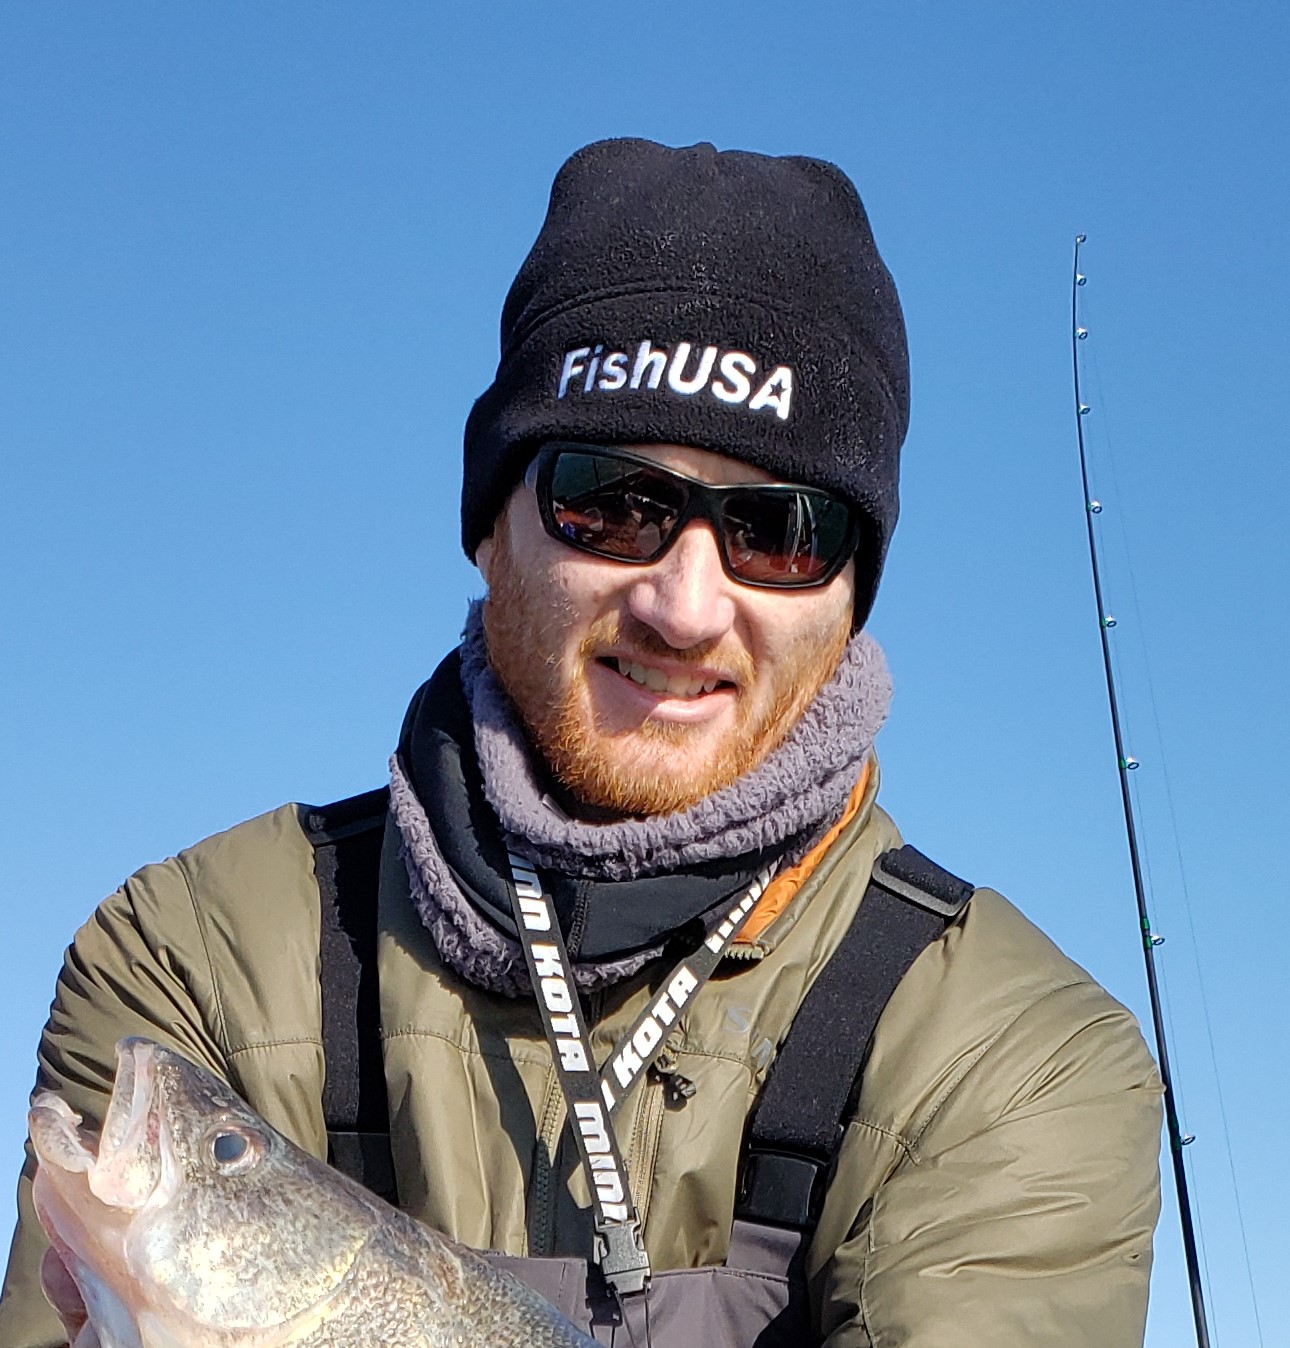 5 Spots to Find Catfish Ice Fishing